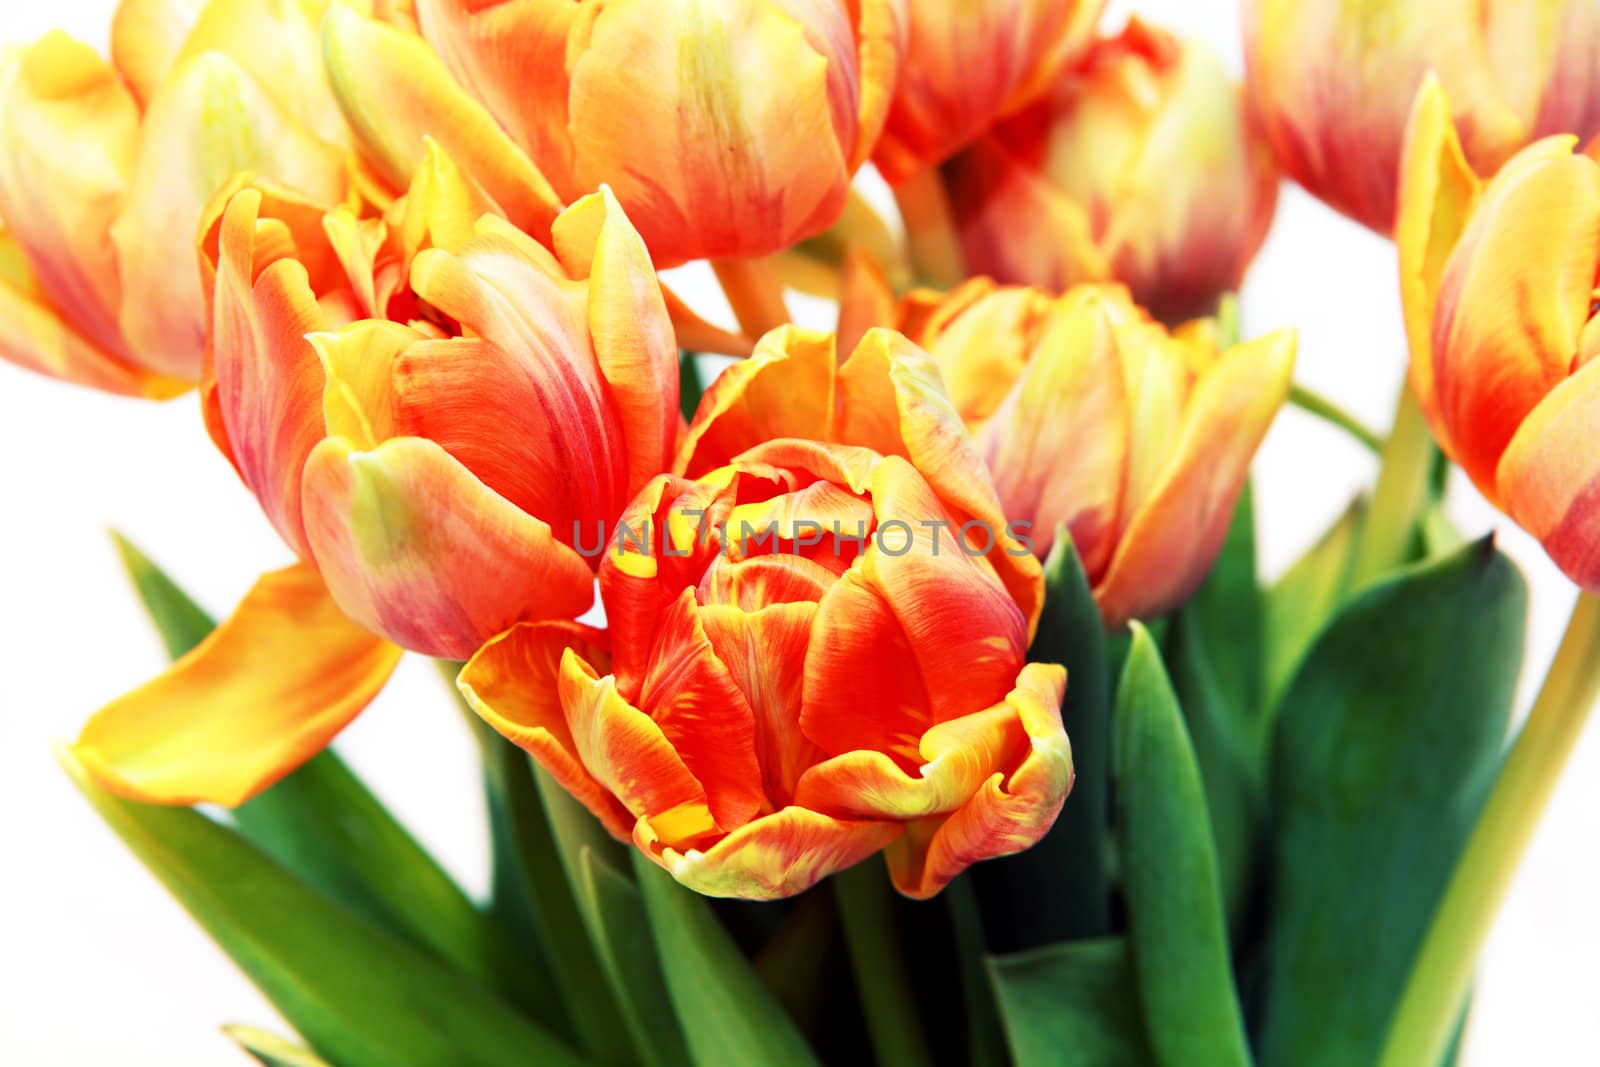 bouquet of fresh red and yellow tulips over white